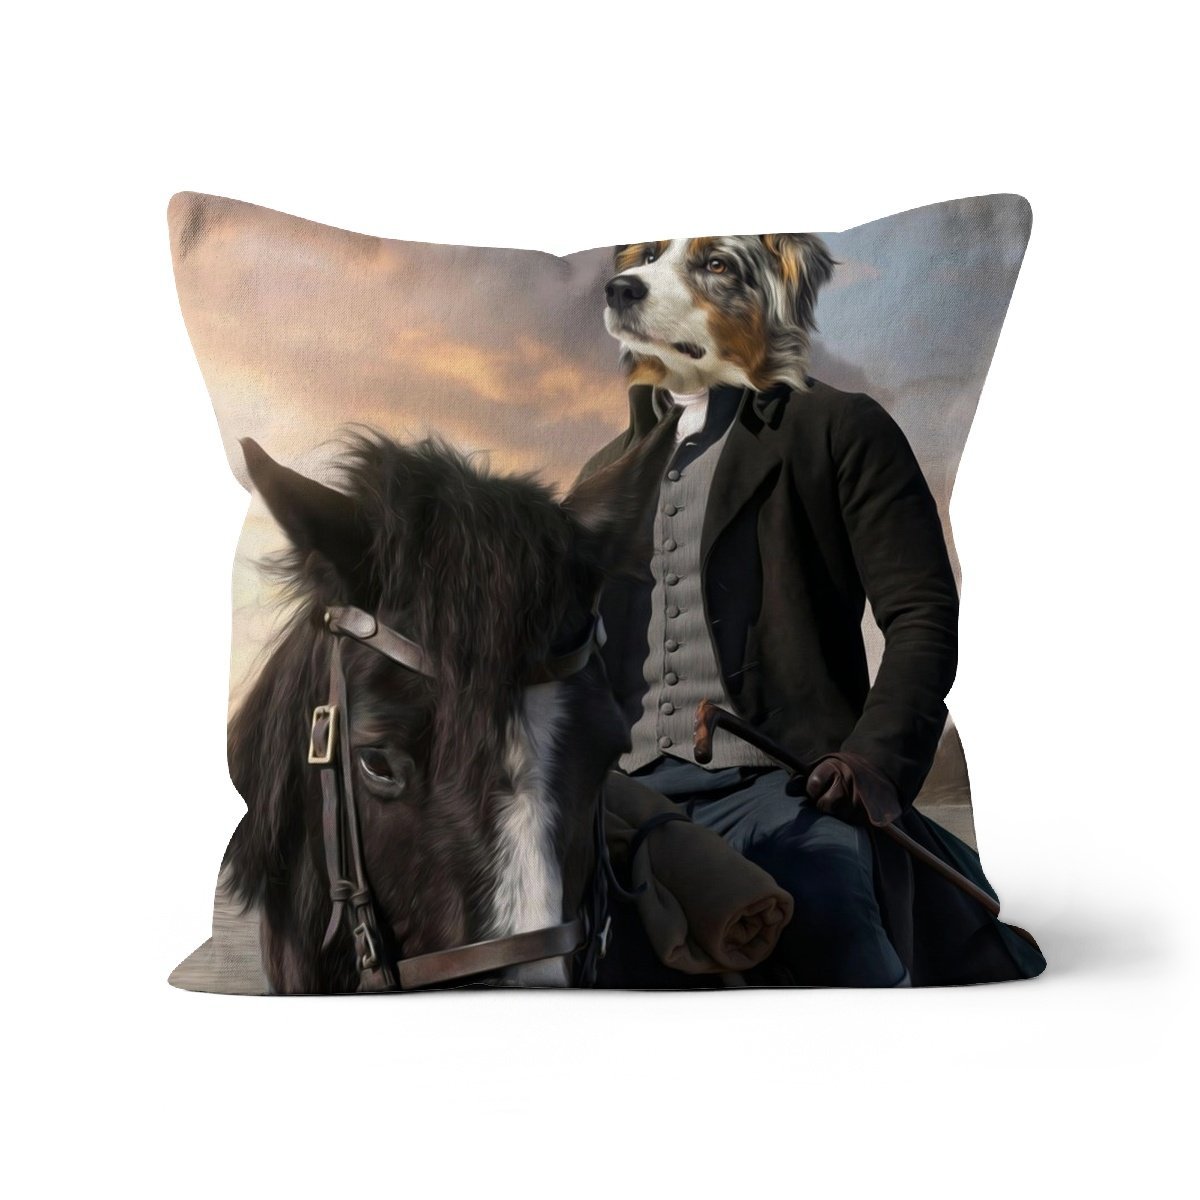 Ross (Poldark Inspired): Custom Pet Cushion - Paw & Glory - #pet portraits# - #dog portraits# - #pet portraits uk#paw and glory, custom pet portrait cushion,dog pillow custom, custom pet pillows, pup pillows, pillow with dogs face, dog pillow cases